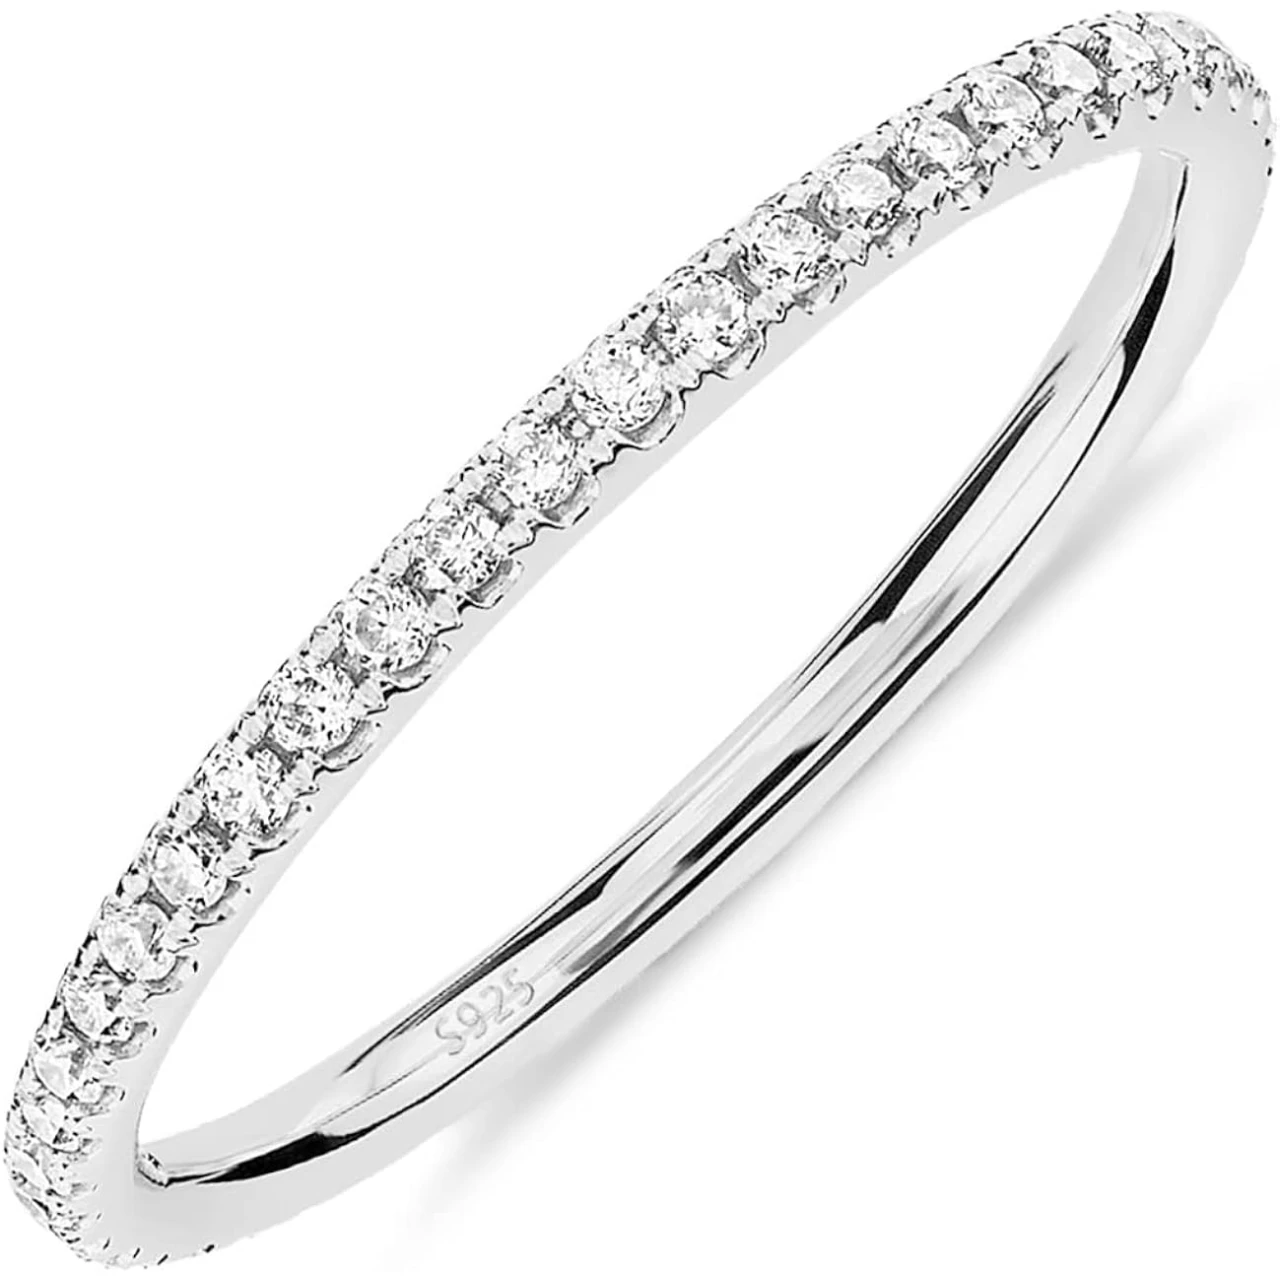 PAVOI 14K Gold Plated Solid 925 Sterling Silver CZ Simulated Diamond Stackable Ring